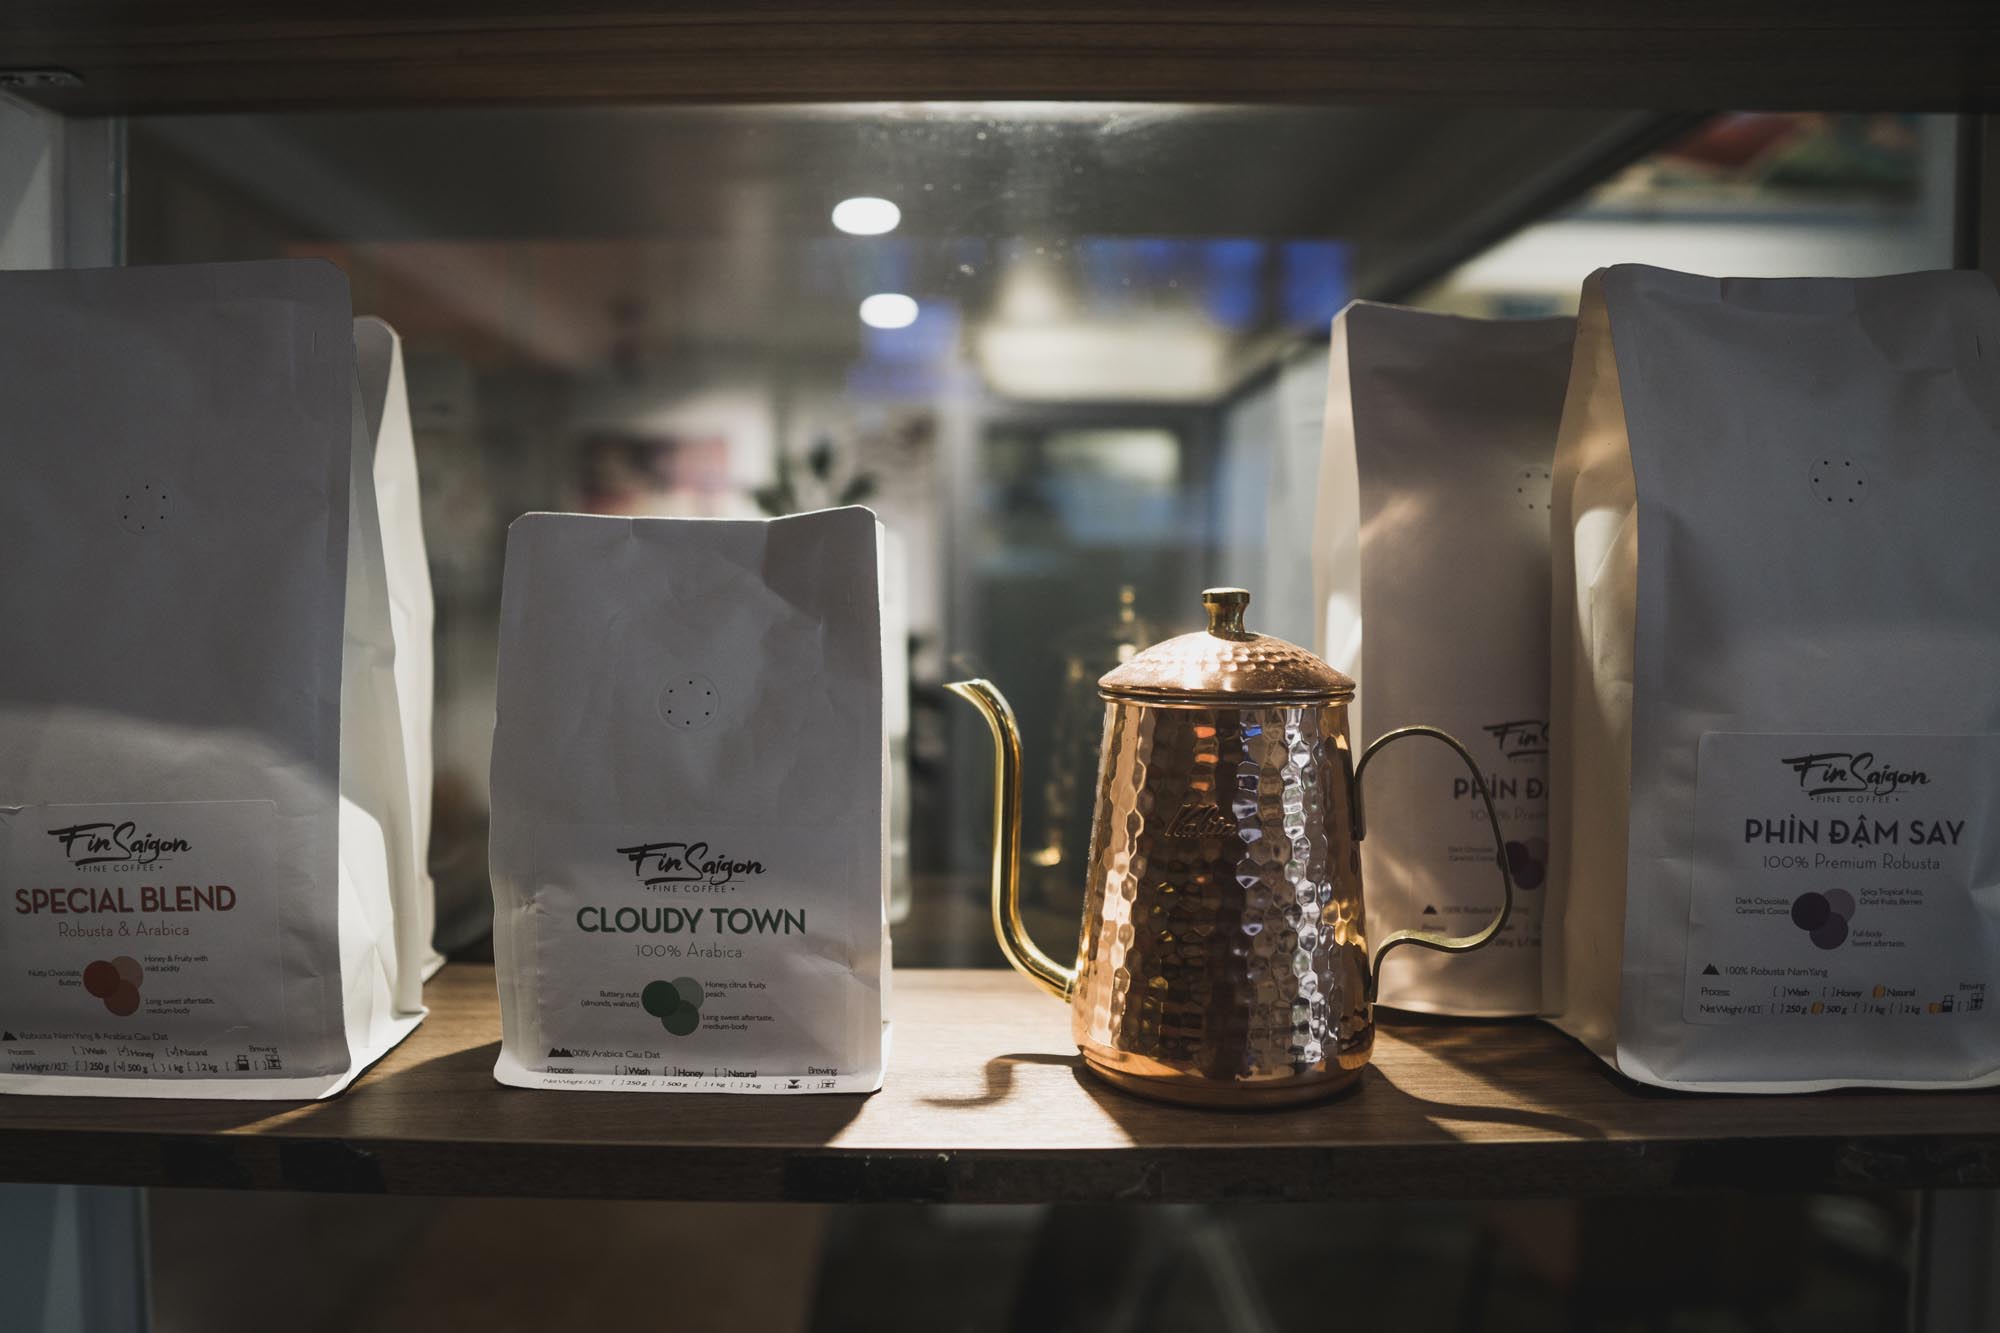 Fin Saigon is a Vietnamese boutique coffee brand using Robusta beans grown sustainably by farming communities across the country, including the renowned coffee and tea producing regions of Lam Dong and Gia Lai in the central highlands. Photo by Nam Quoc Tran